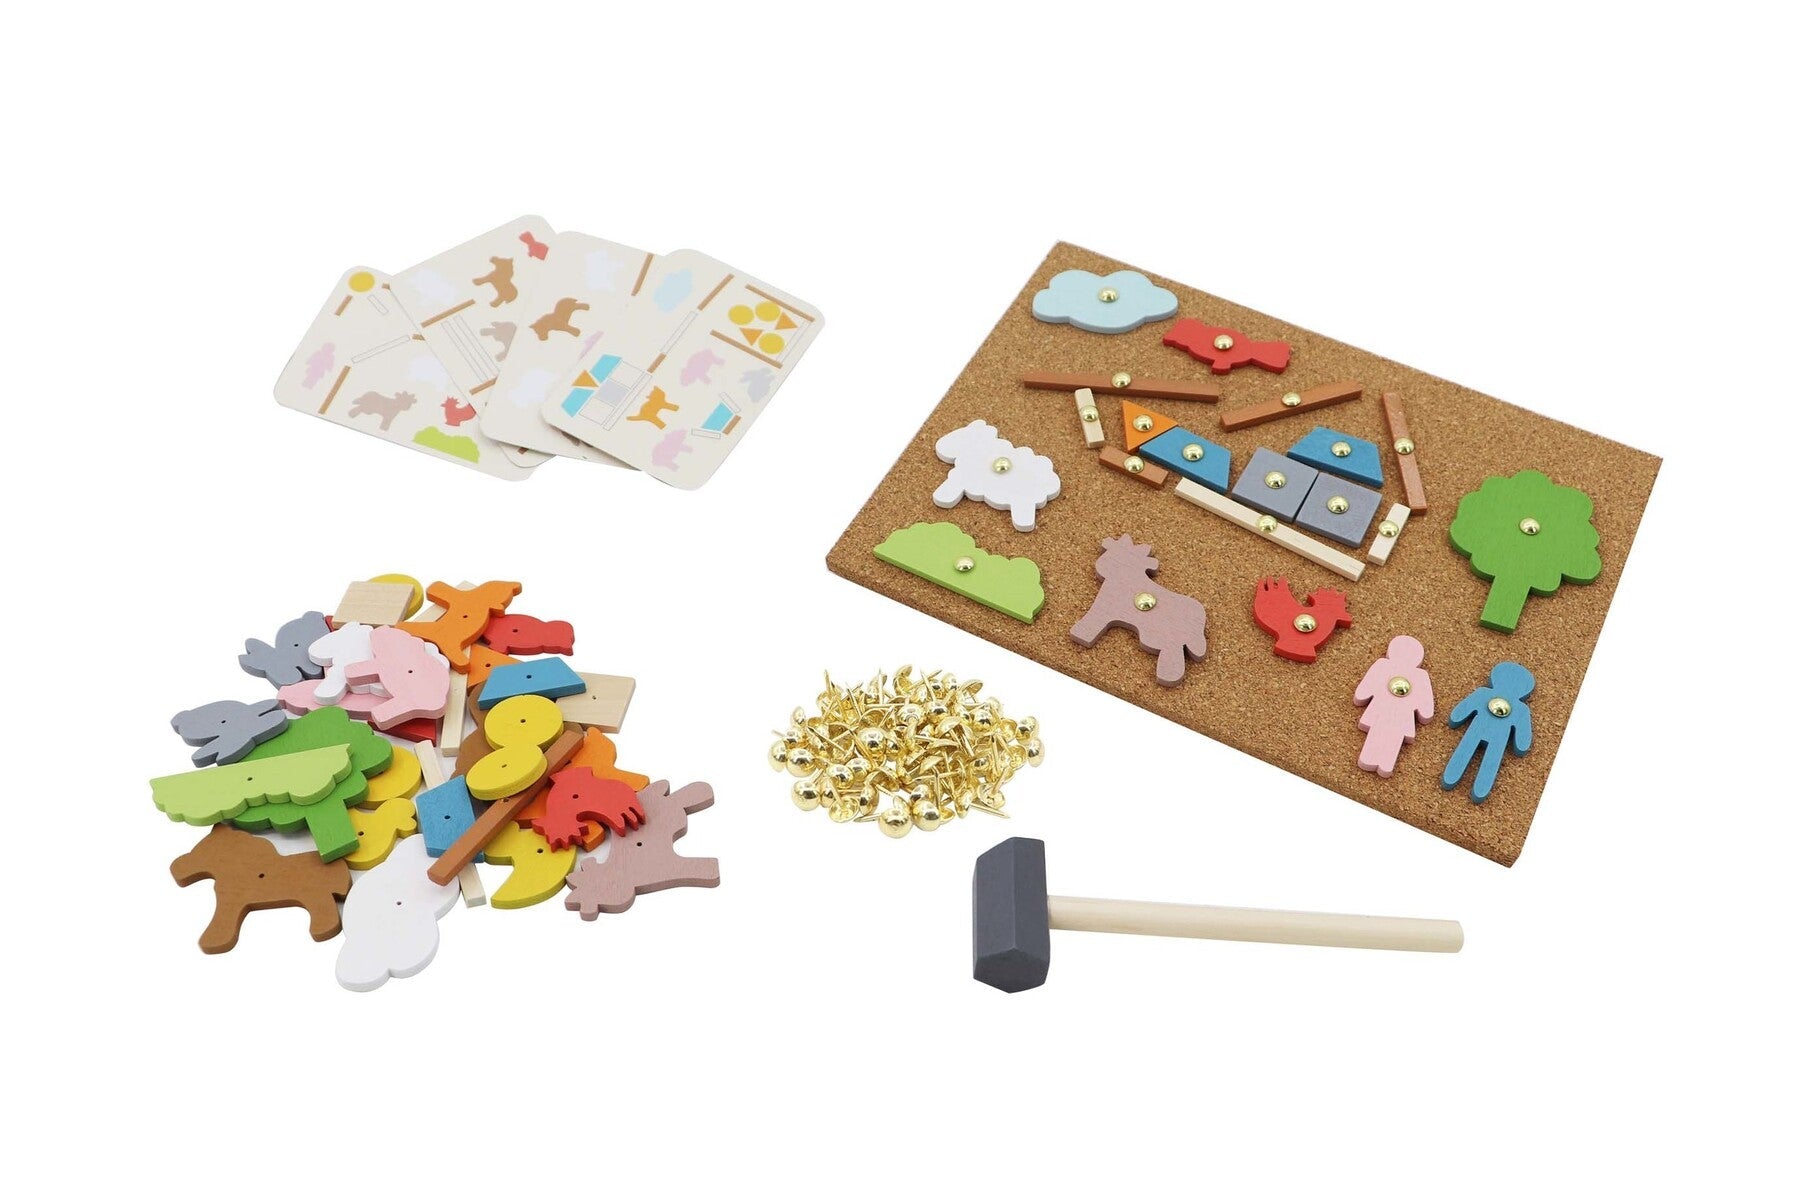 Fun Farm Themed Toy for Kids, corkboard, hammer, nails wooden shapes